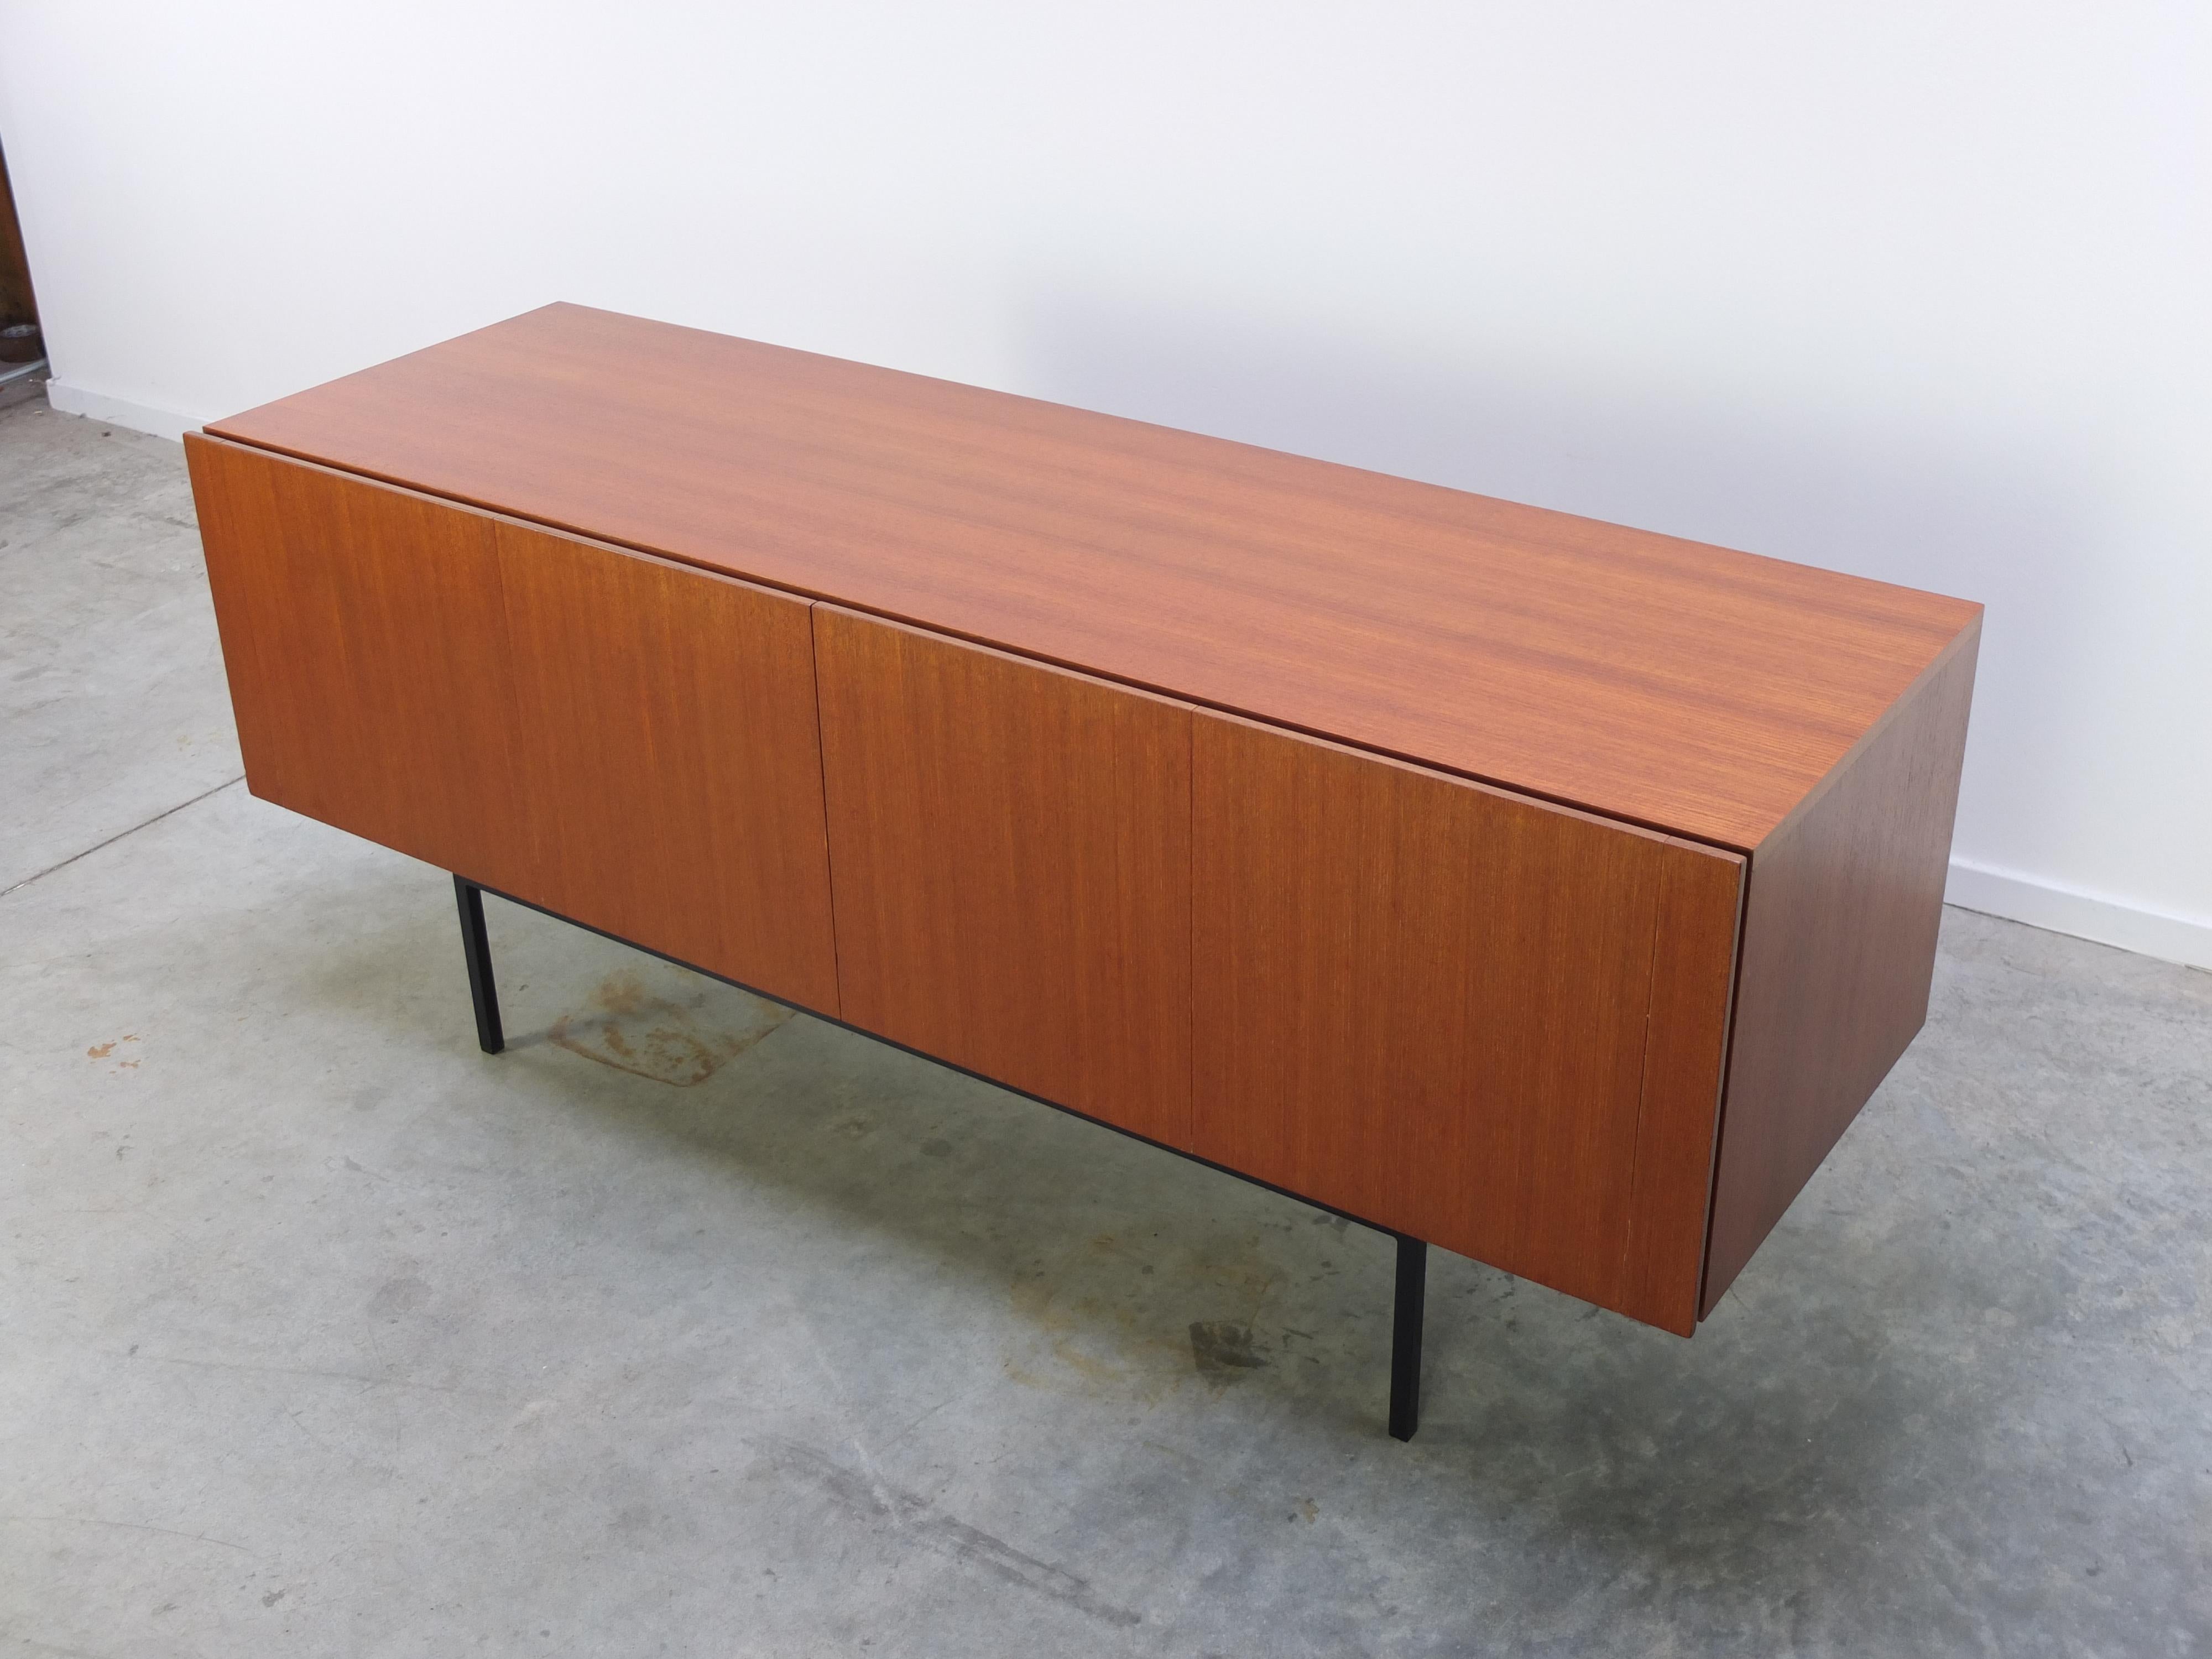 Modernist ‘B20’ sideboard designed by Swiss architect Dieter Waeckerlin for Behr Möbel in Germany in the 1950s. This is the rare smaller version of the famous B-series by Waeckerlin which is recognizable by its minimalist and purist design. This